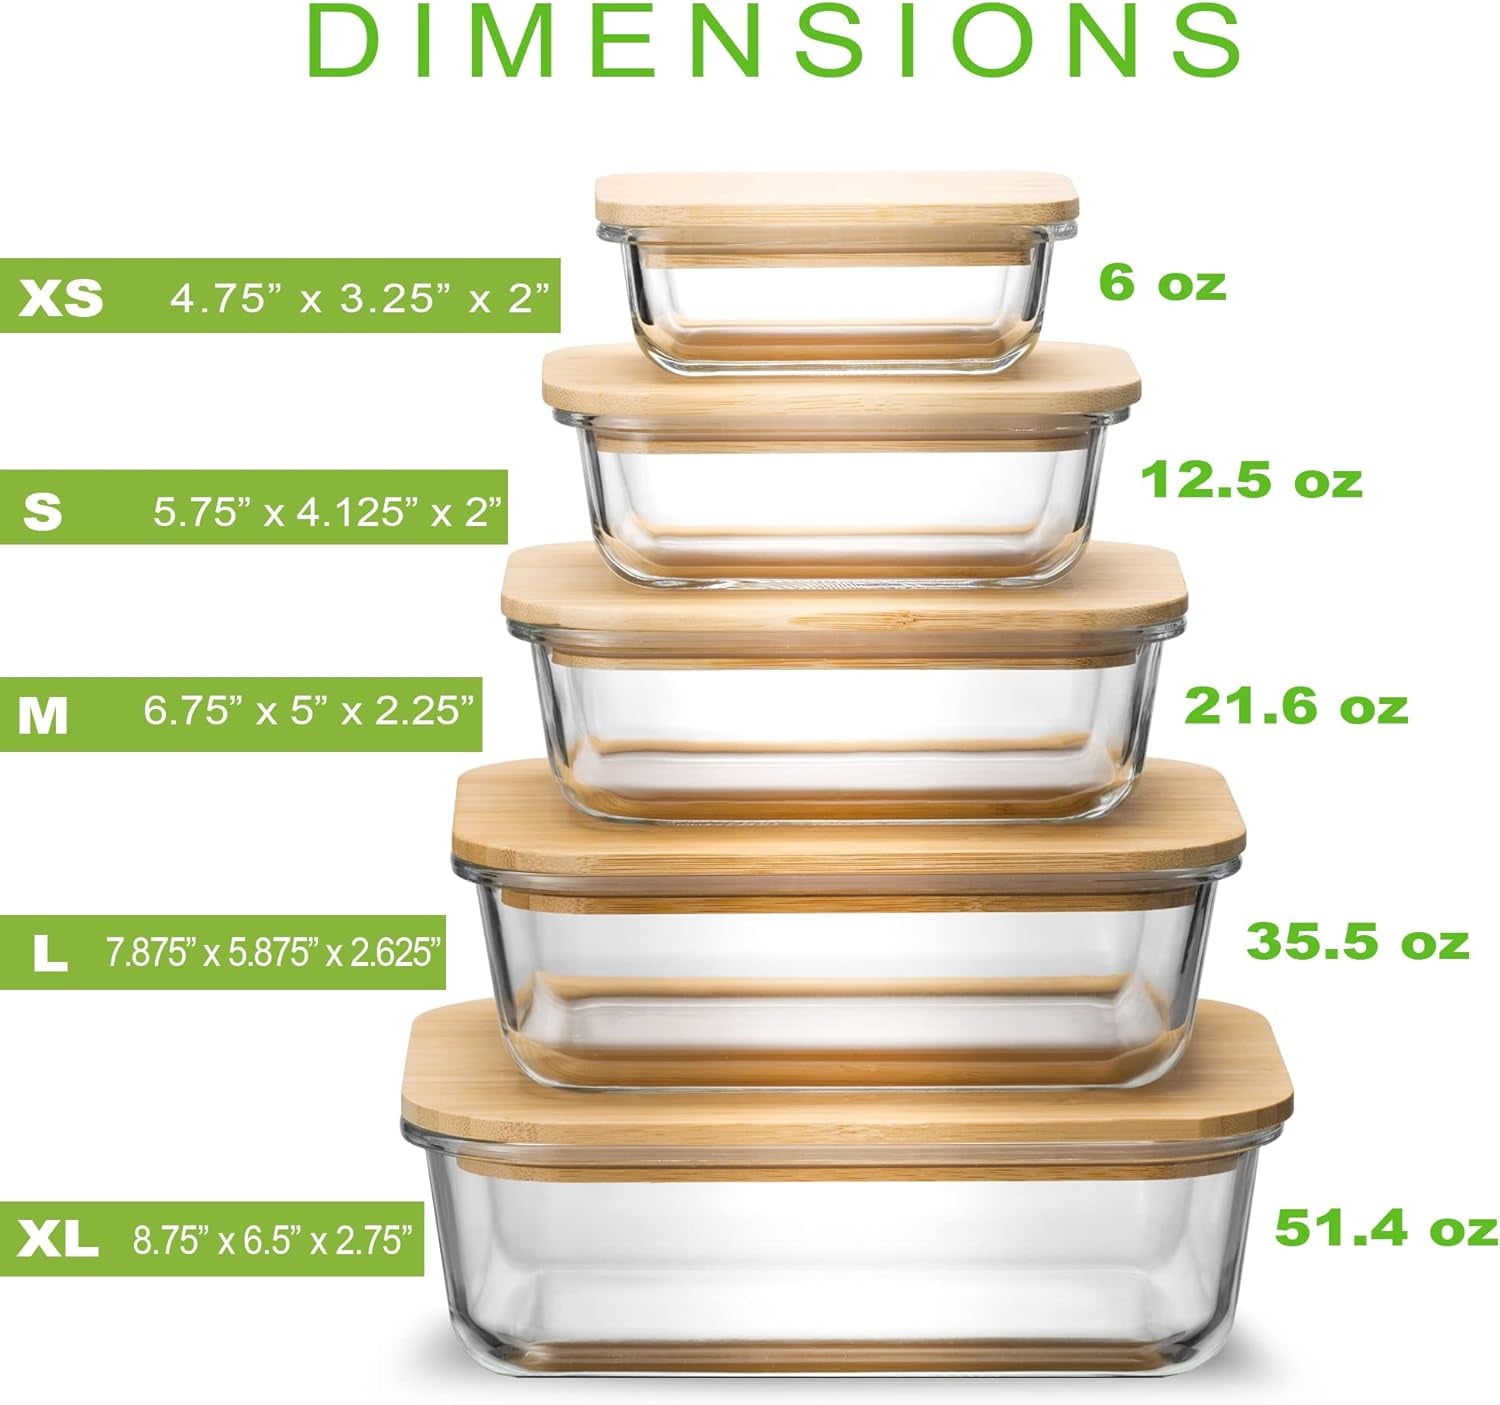 Glass Food Storage Containers with Bamboo Lids Eco-Friendly, Set of 5, Airtight, Pantry Organization, Meal Prep Glass Containers. Plastic Free. BPA Free. Microwave Oven Dishwasher and Freezer Safe